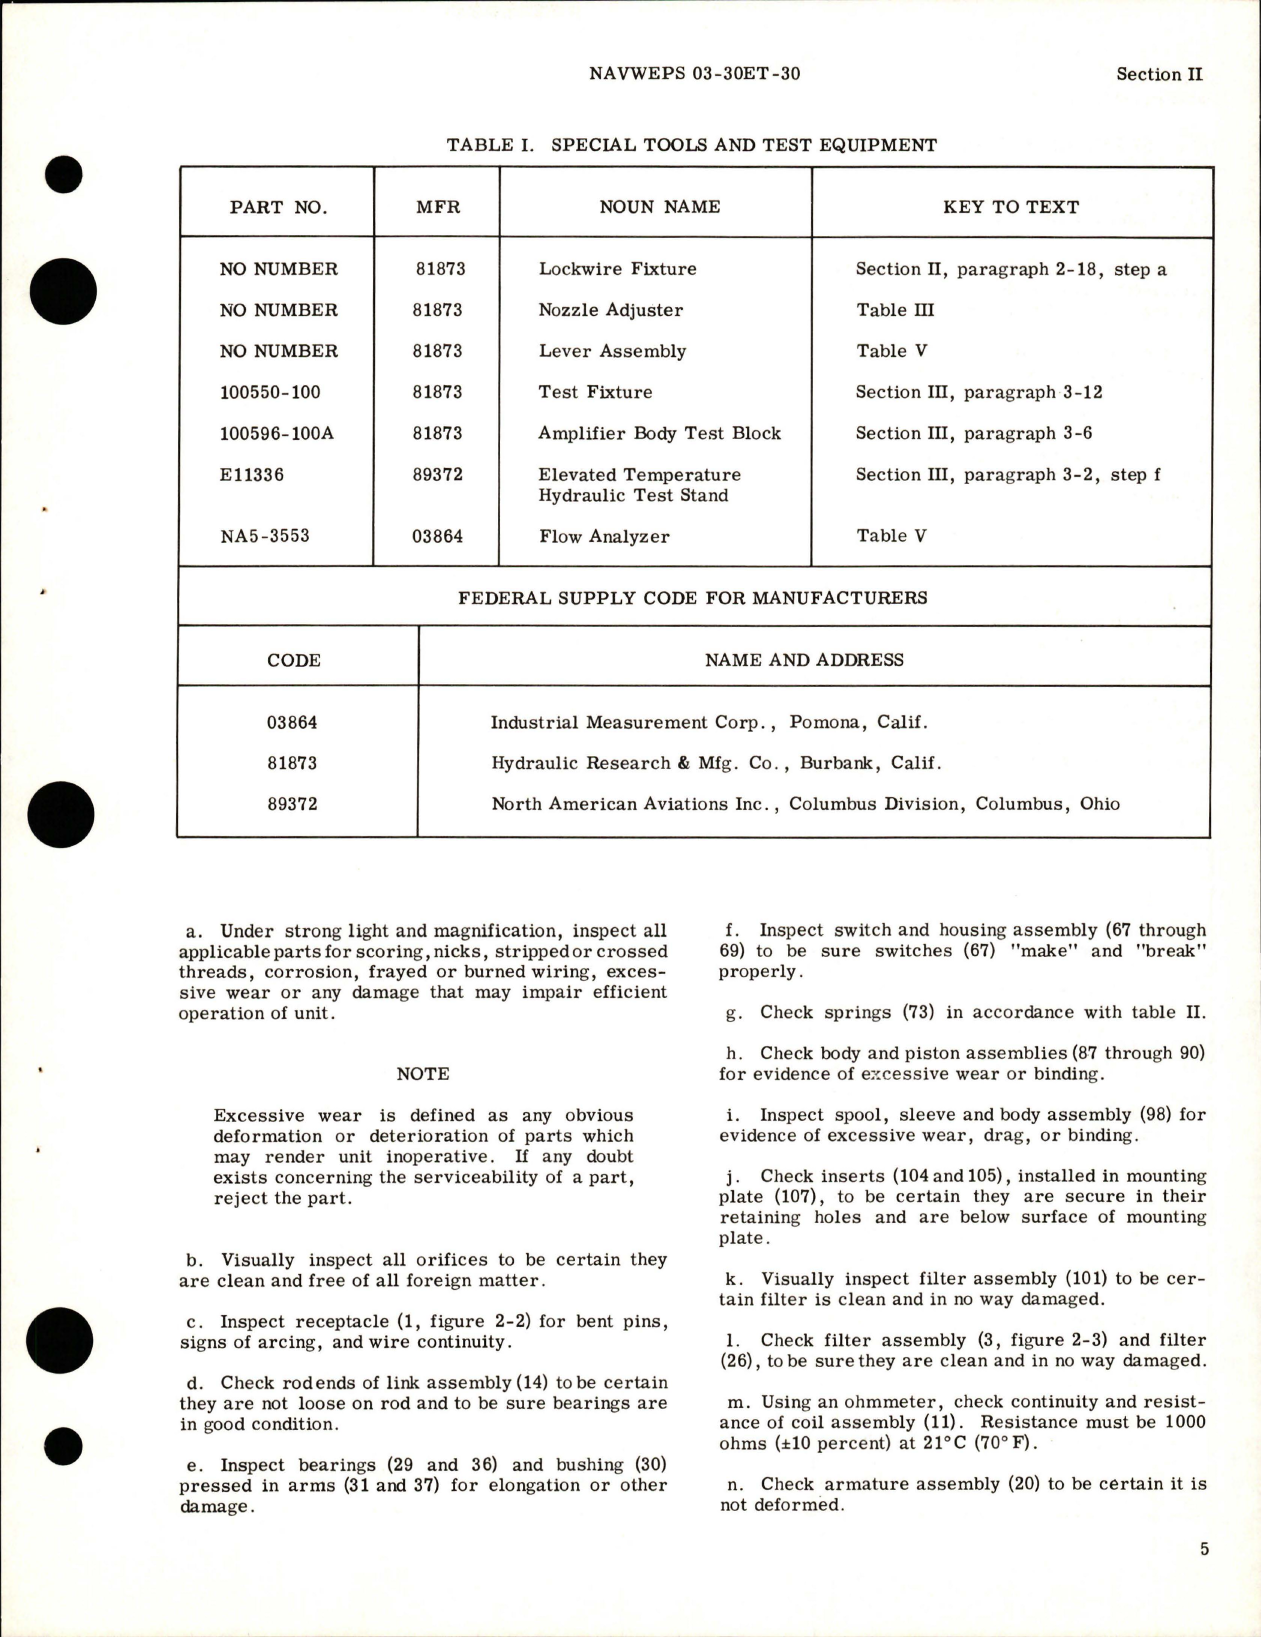 Sample page 9 from AirCorps Library document: Overhaul Instructions for Hydraulic Servo Valve Assy - Part 100550 